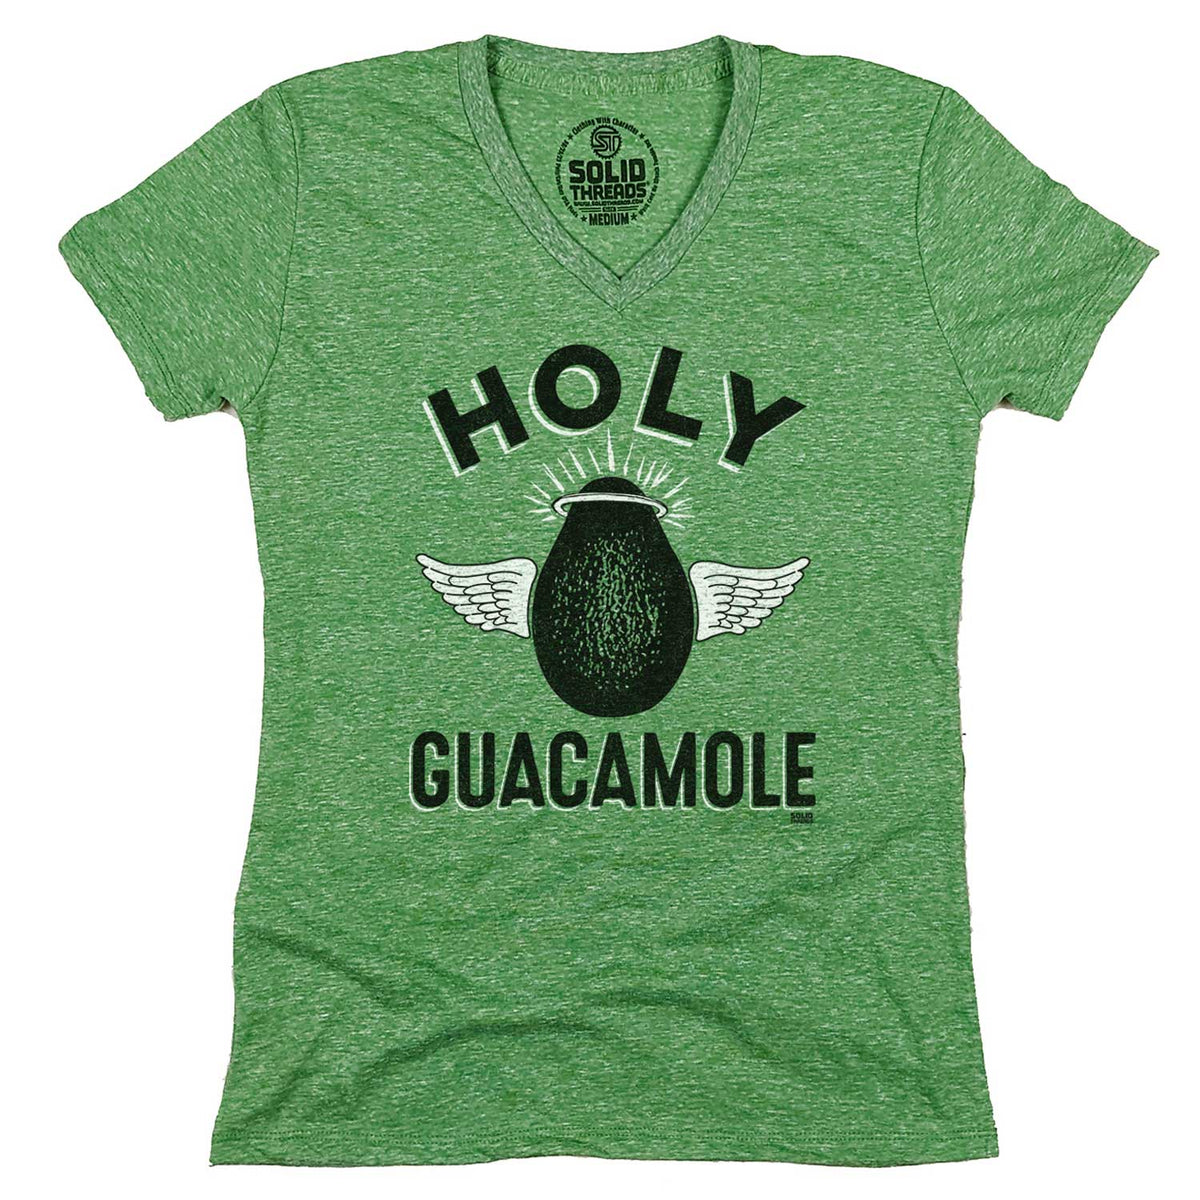 Women&#39;s Holy Guacamole Vintage Graphic V-Neck Tee | Funny Avocado T-shirt | Solid Threads